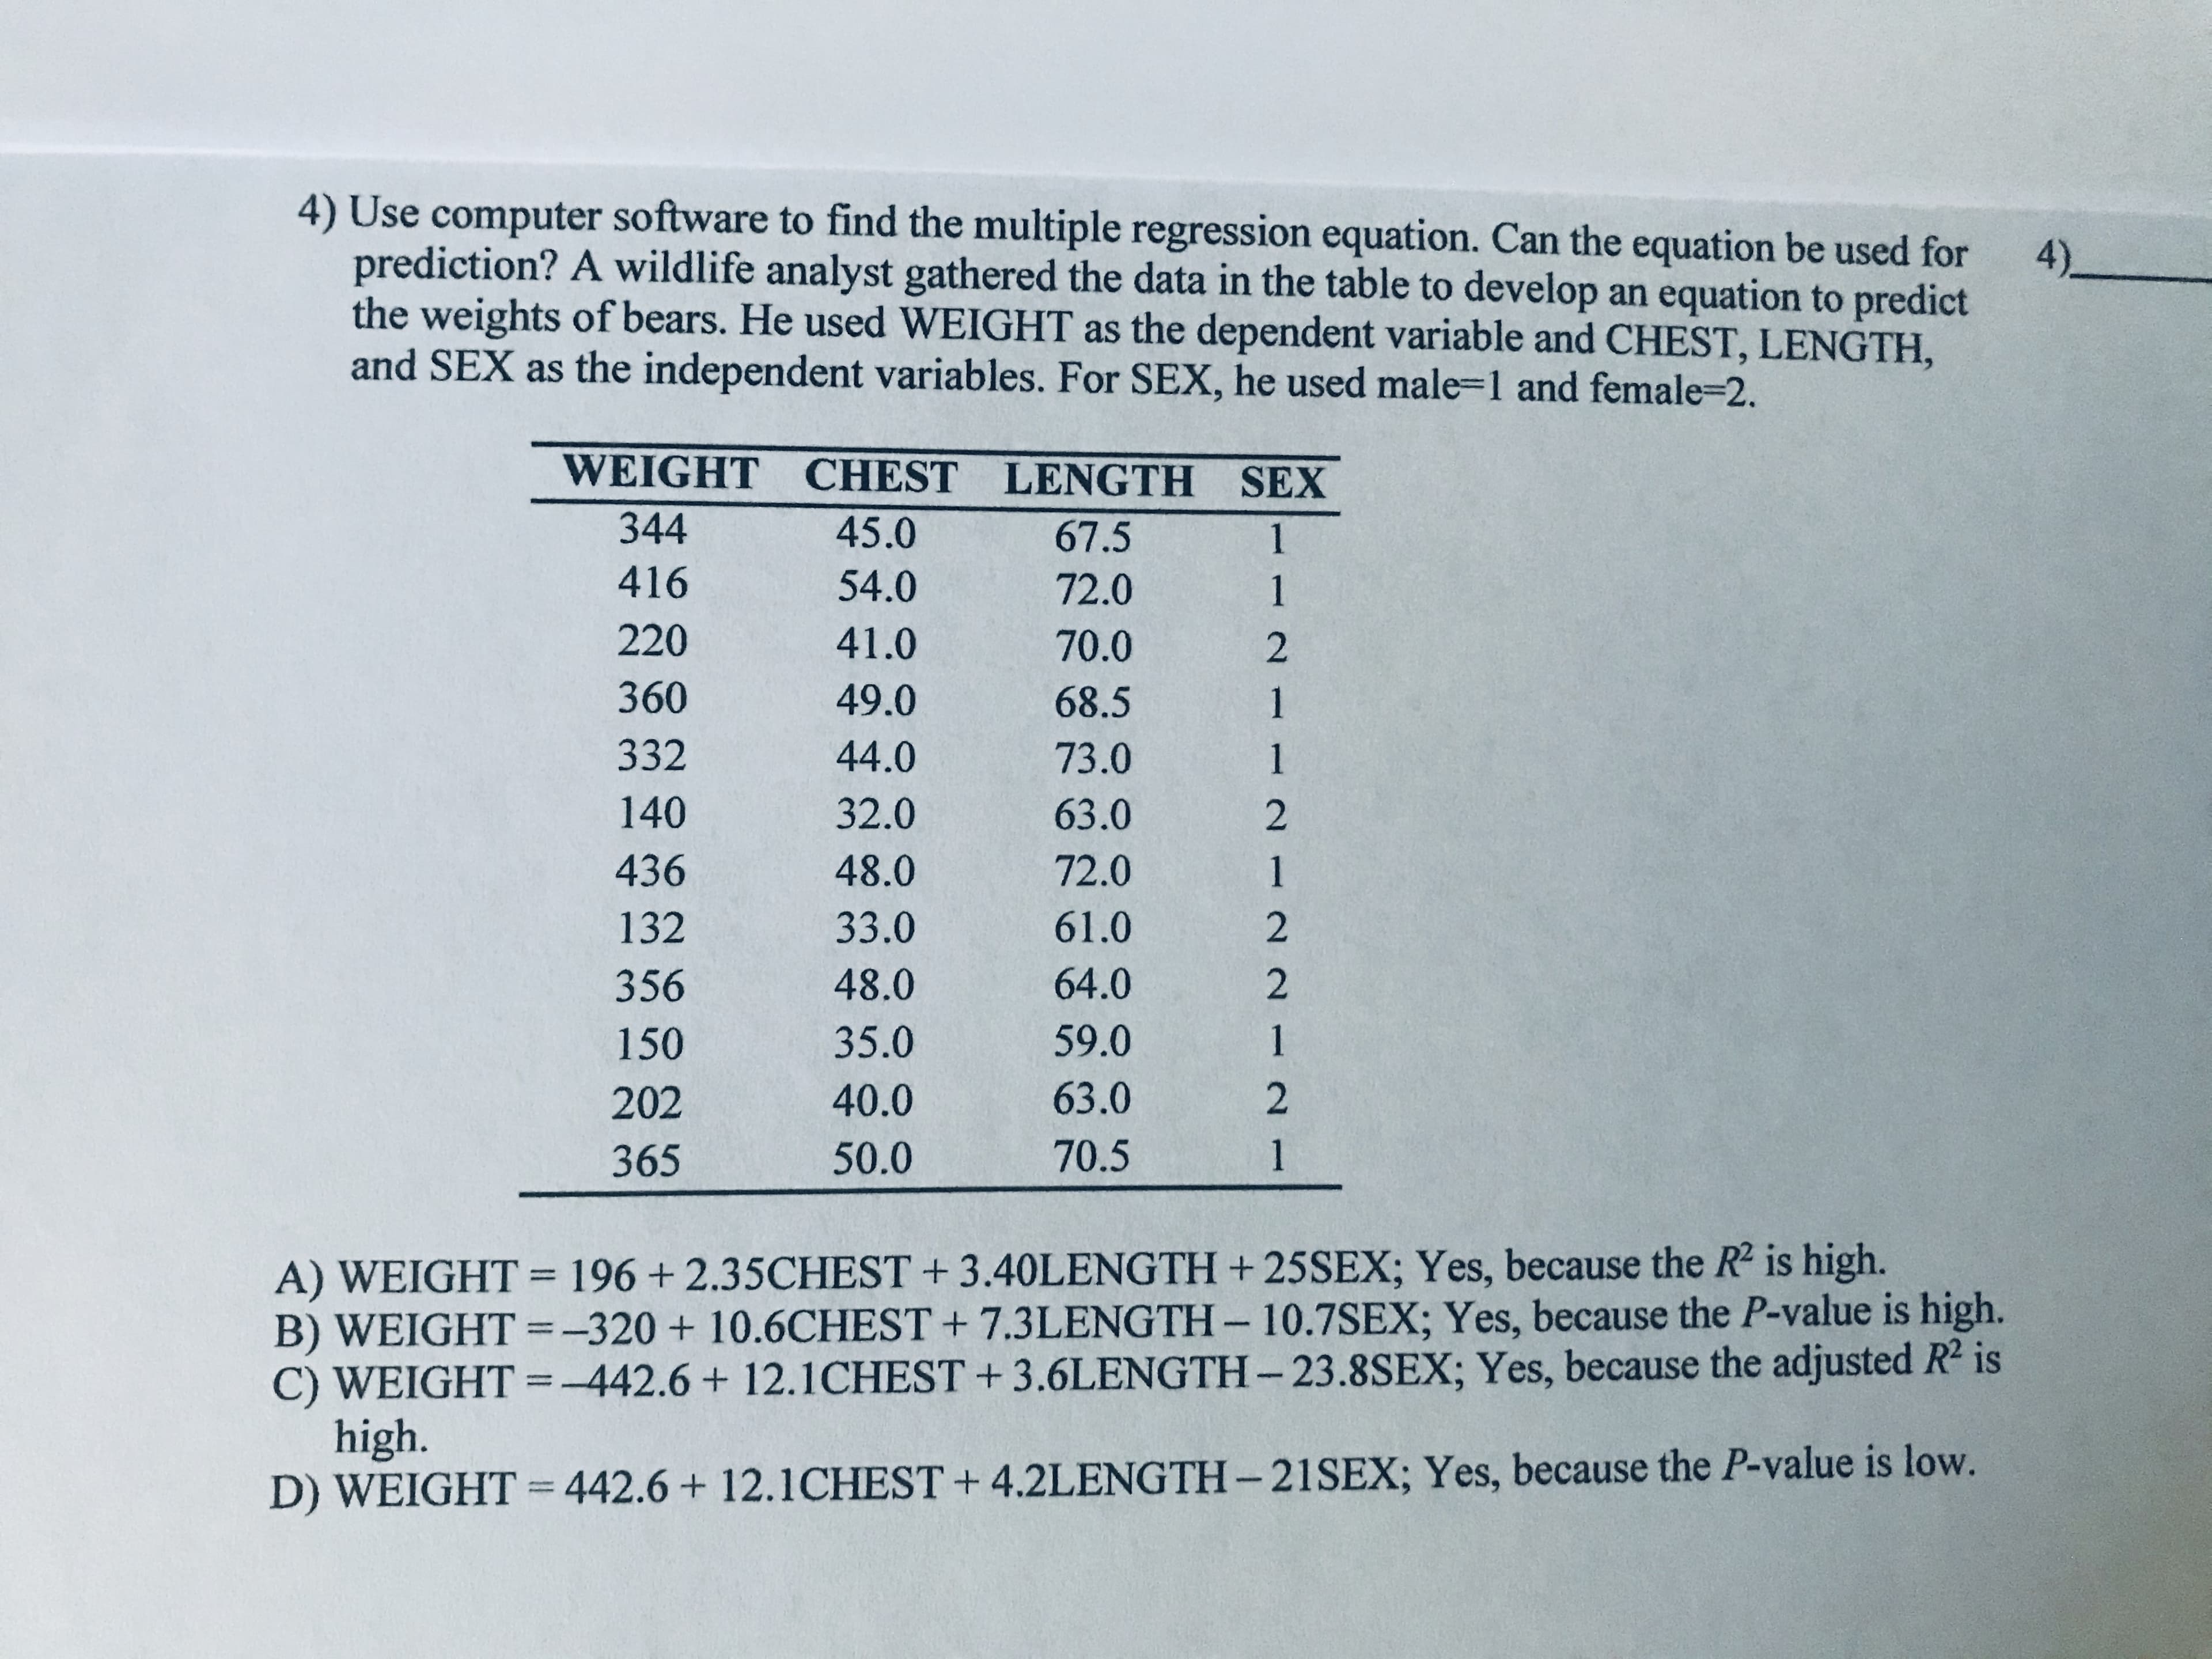 4) Use computer software to find the multiple regression equation. Can the equation be used for
prediction? A wildlife analyst gathered the data in the table to develop an equation to predict
the weights of bears. He used WEIGHT as the dependent variable and CHEST, LENGTH,
4)_
and SEX as the independent variables. For SEX, he used male-1 and female=2.
WEIGHT CHEST LENGTH SEX
344
45.0
67.5
1
416
54.0
72.0
1
220
41.0
70.0
360
49.0
68.5
332
44.0
73.0
1
140
32.0
63.0
436
48.0
72.0
1
132
33.0
61.0
356
48.0
64.0
150
35.0
59.0
1
202
40.0
63.0
365
50.0
70.5
1
A) WEIGHT = 196 + 2.35CHEST + 3.40LENGTH + 25SEX; Yes, because the R2 is high.
B) WEIGHT =-320+10.6CHEST + 7.3LENGTH-10.7SEX; Yes, because the P-value is high.
C) WEIGHT =-442.6 + 12.1CHEST + 3.6LENGTH- 23.8SEX; Yes, because the adjusted R² is
high.
D) WEIGHT = 442.6+ 12.1CHEST + 4.2LENGTH– 21SEX; Yes, because the P-value is low.
%3D
|D
%3D
